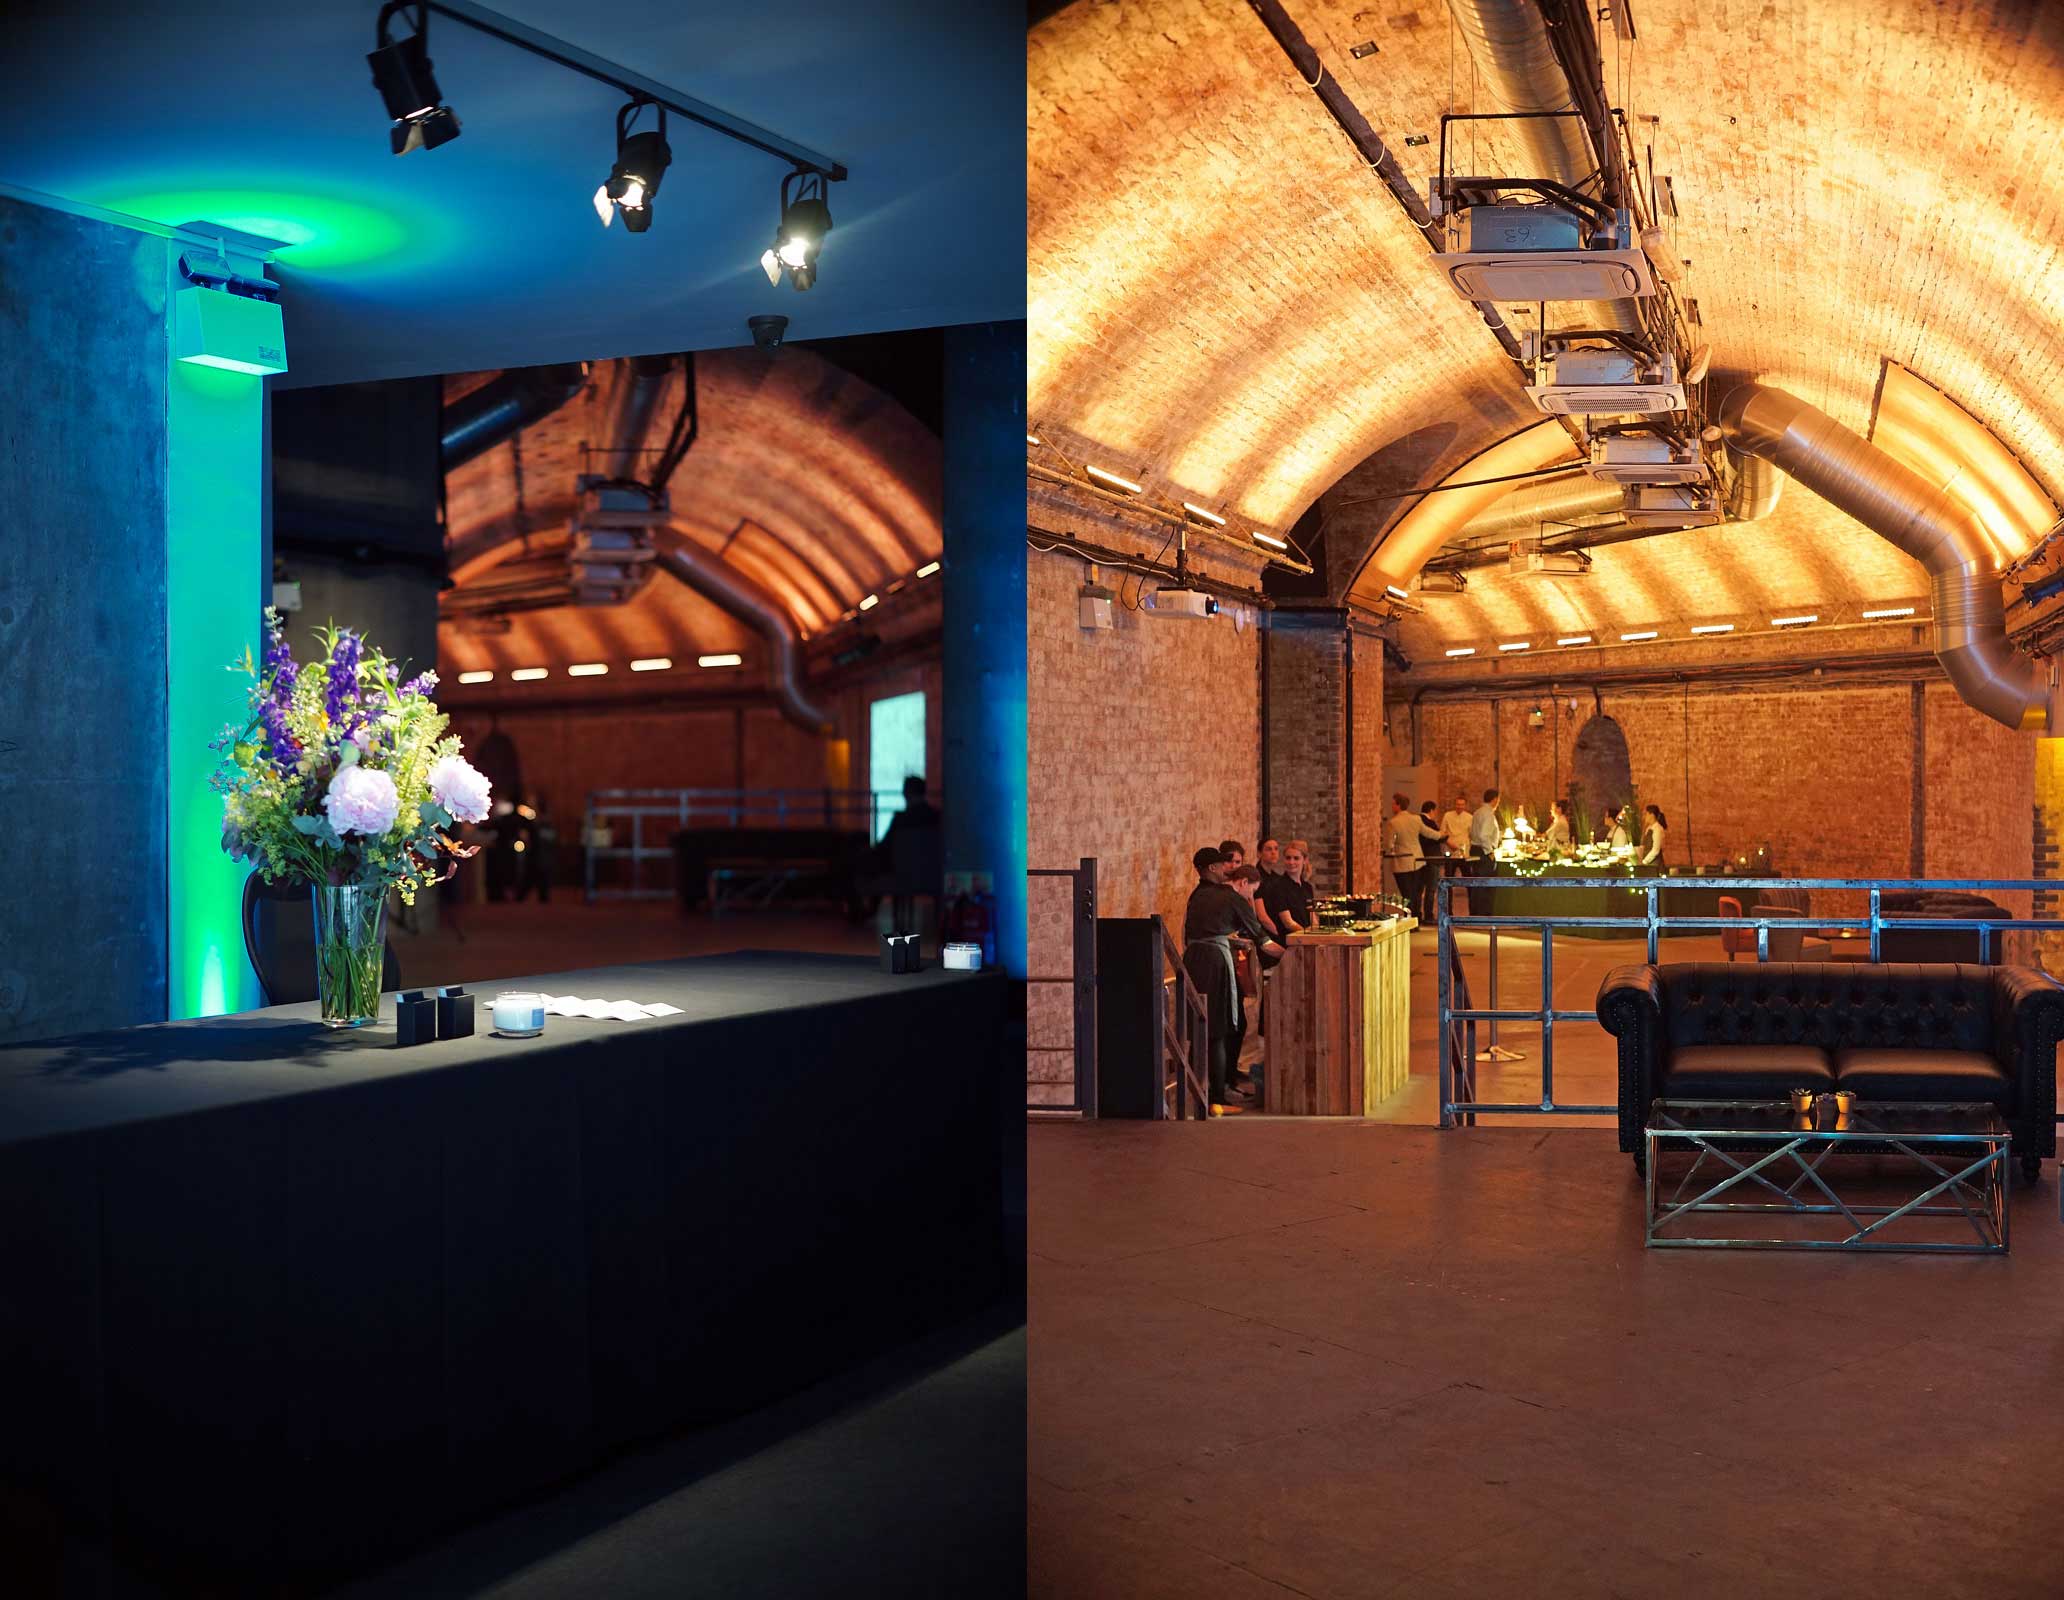 Reception at London South Bank Event Venue represented for hire by VenuesLDN.co.uk